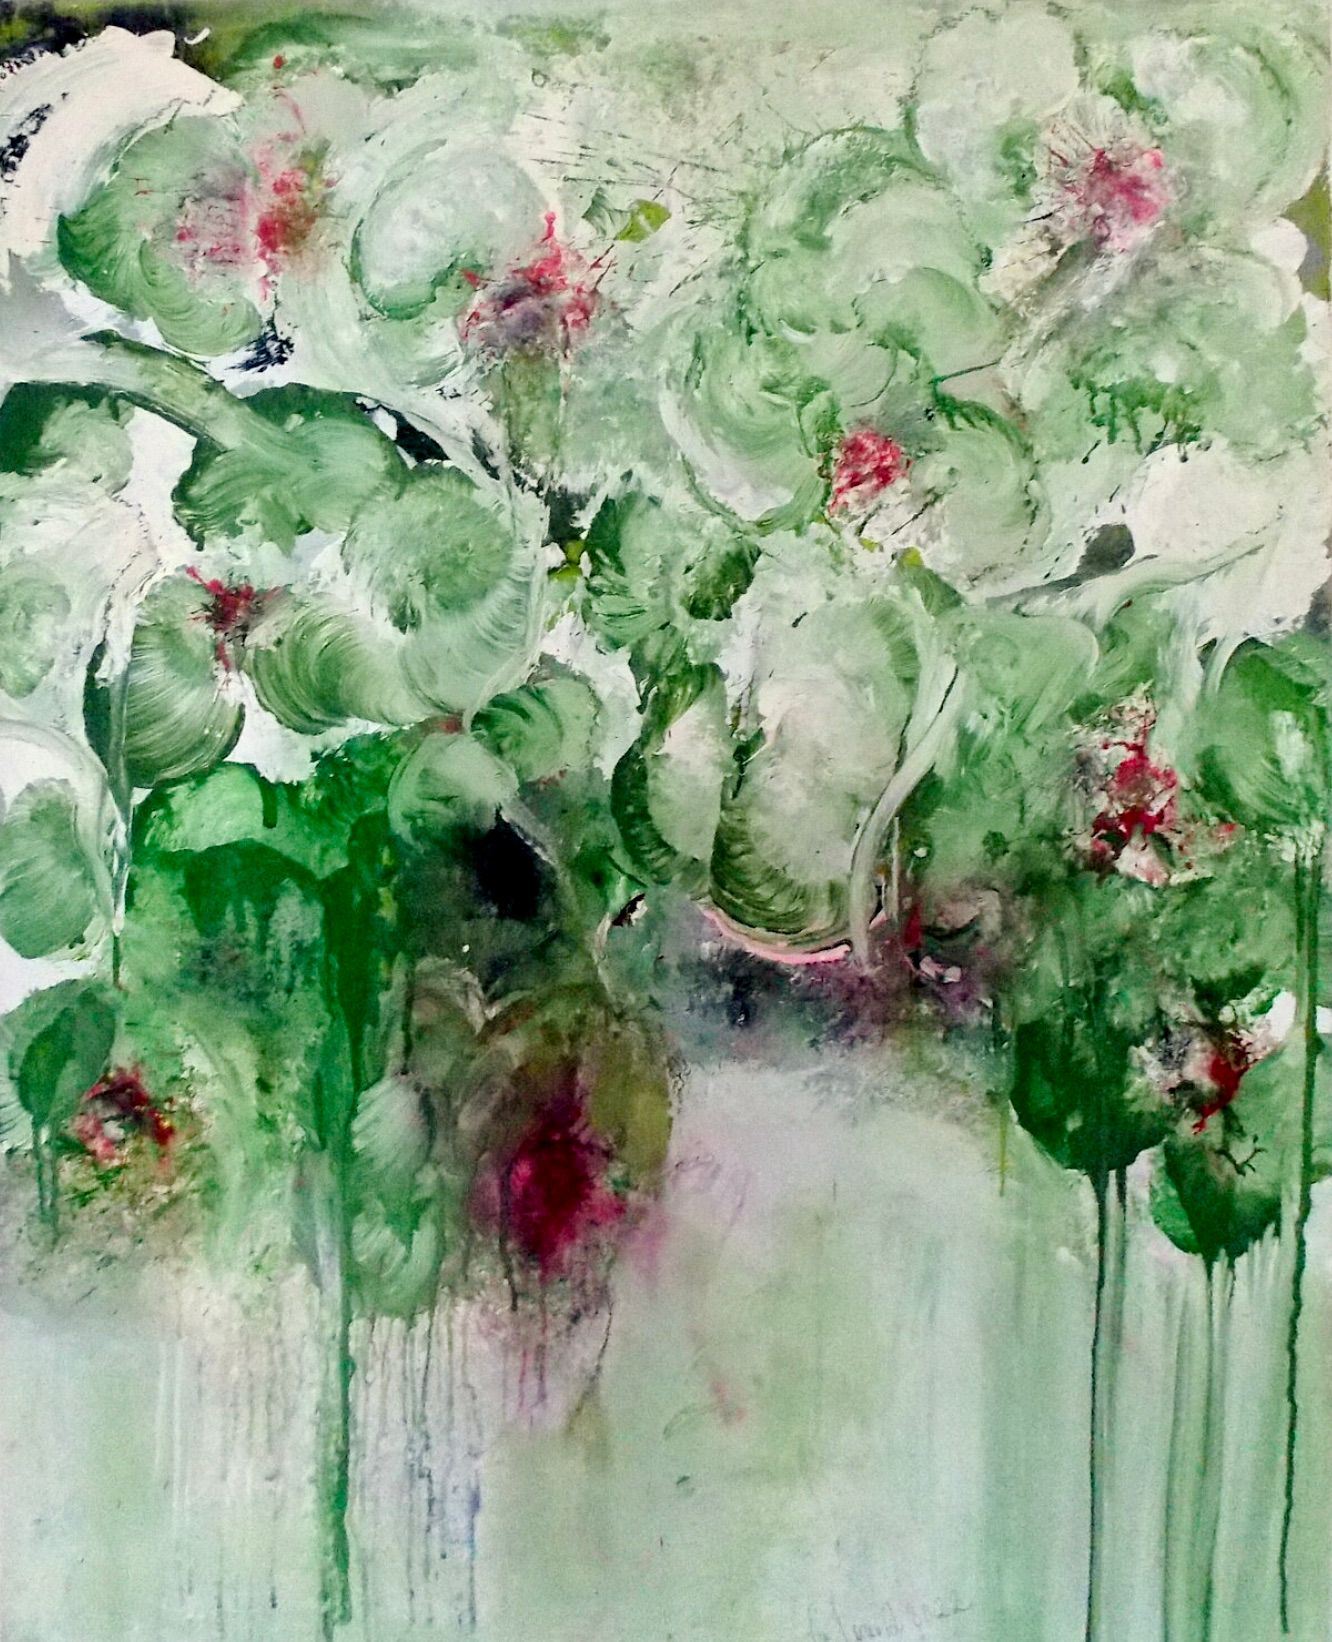 In Christa Haack's "Im Rausch der Blumen 6" Expressionist Abstract Flower Painting the colours green, beige, and red dominate.